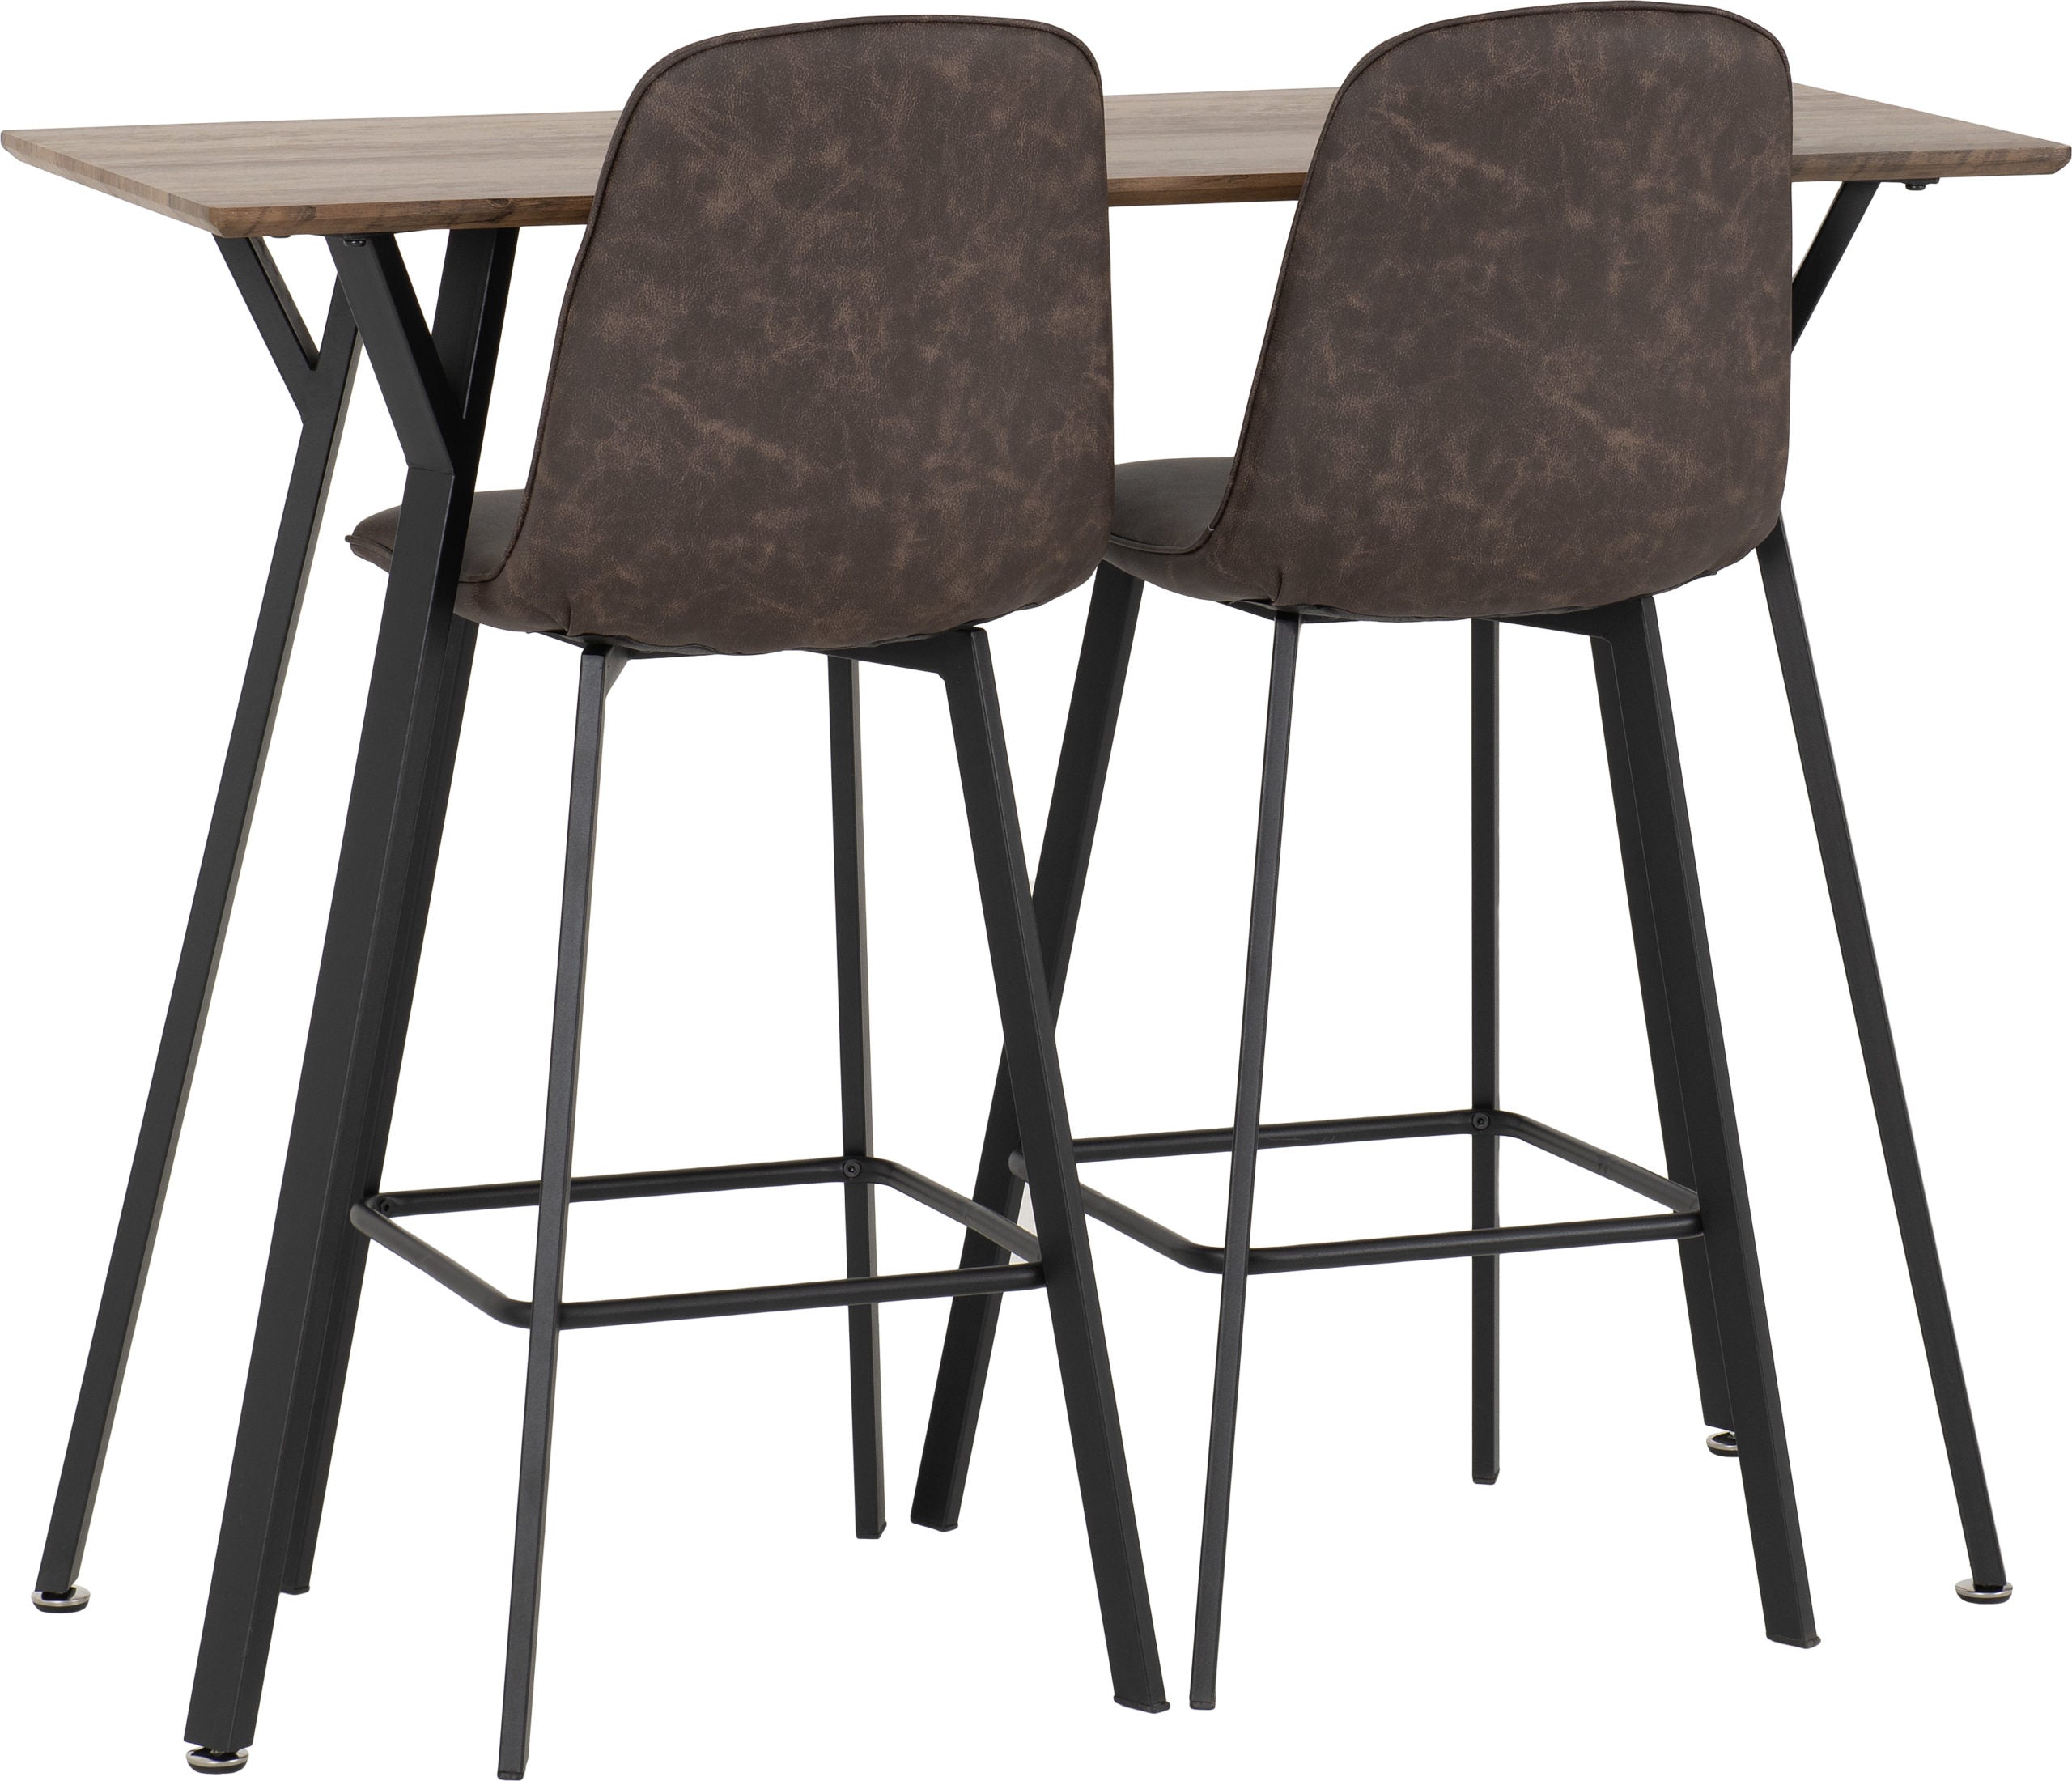 Quebec Bar Table With Two Bar Chairs